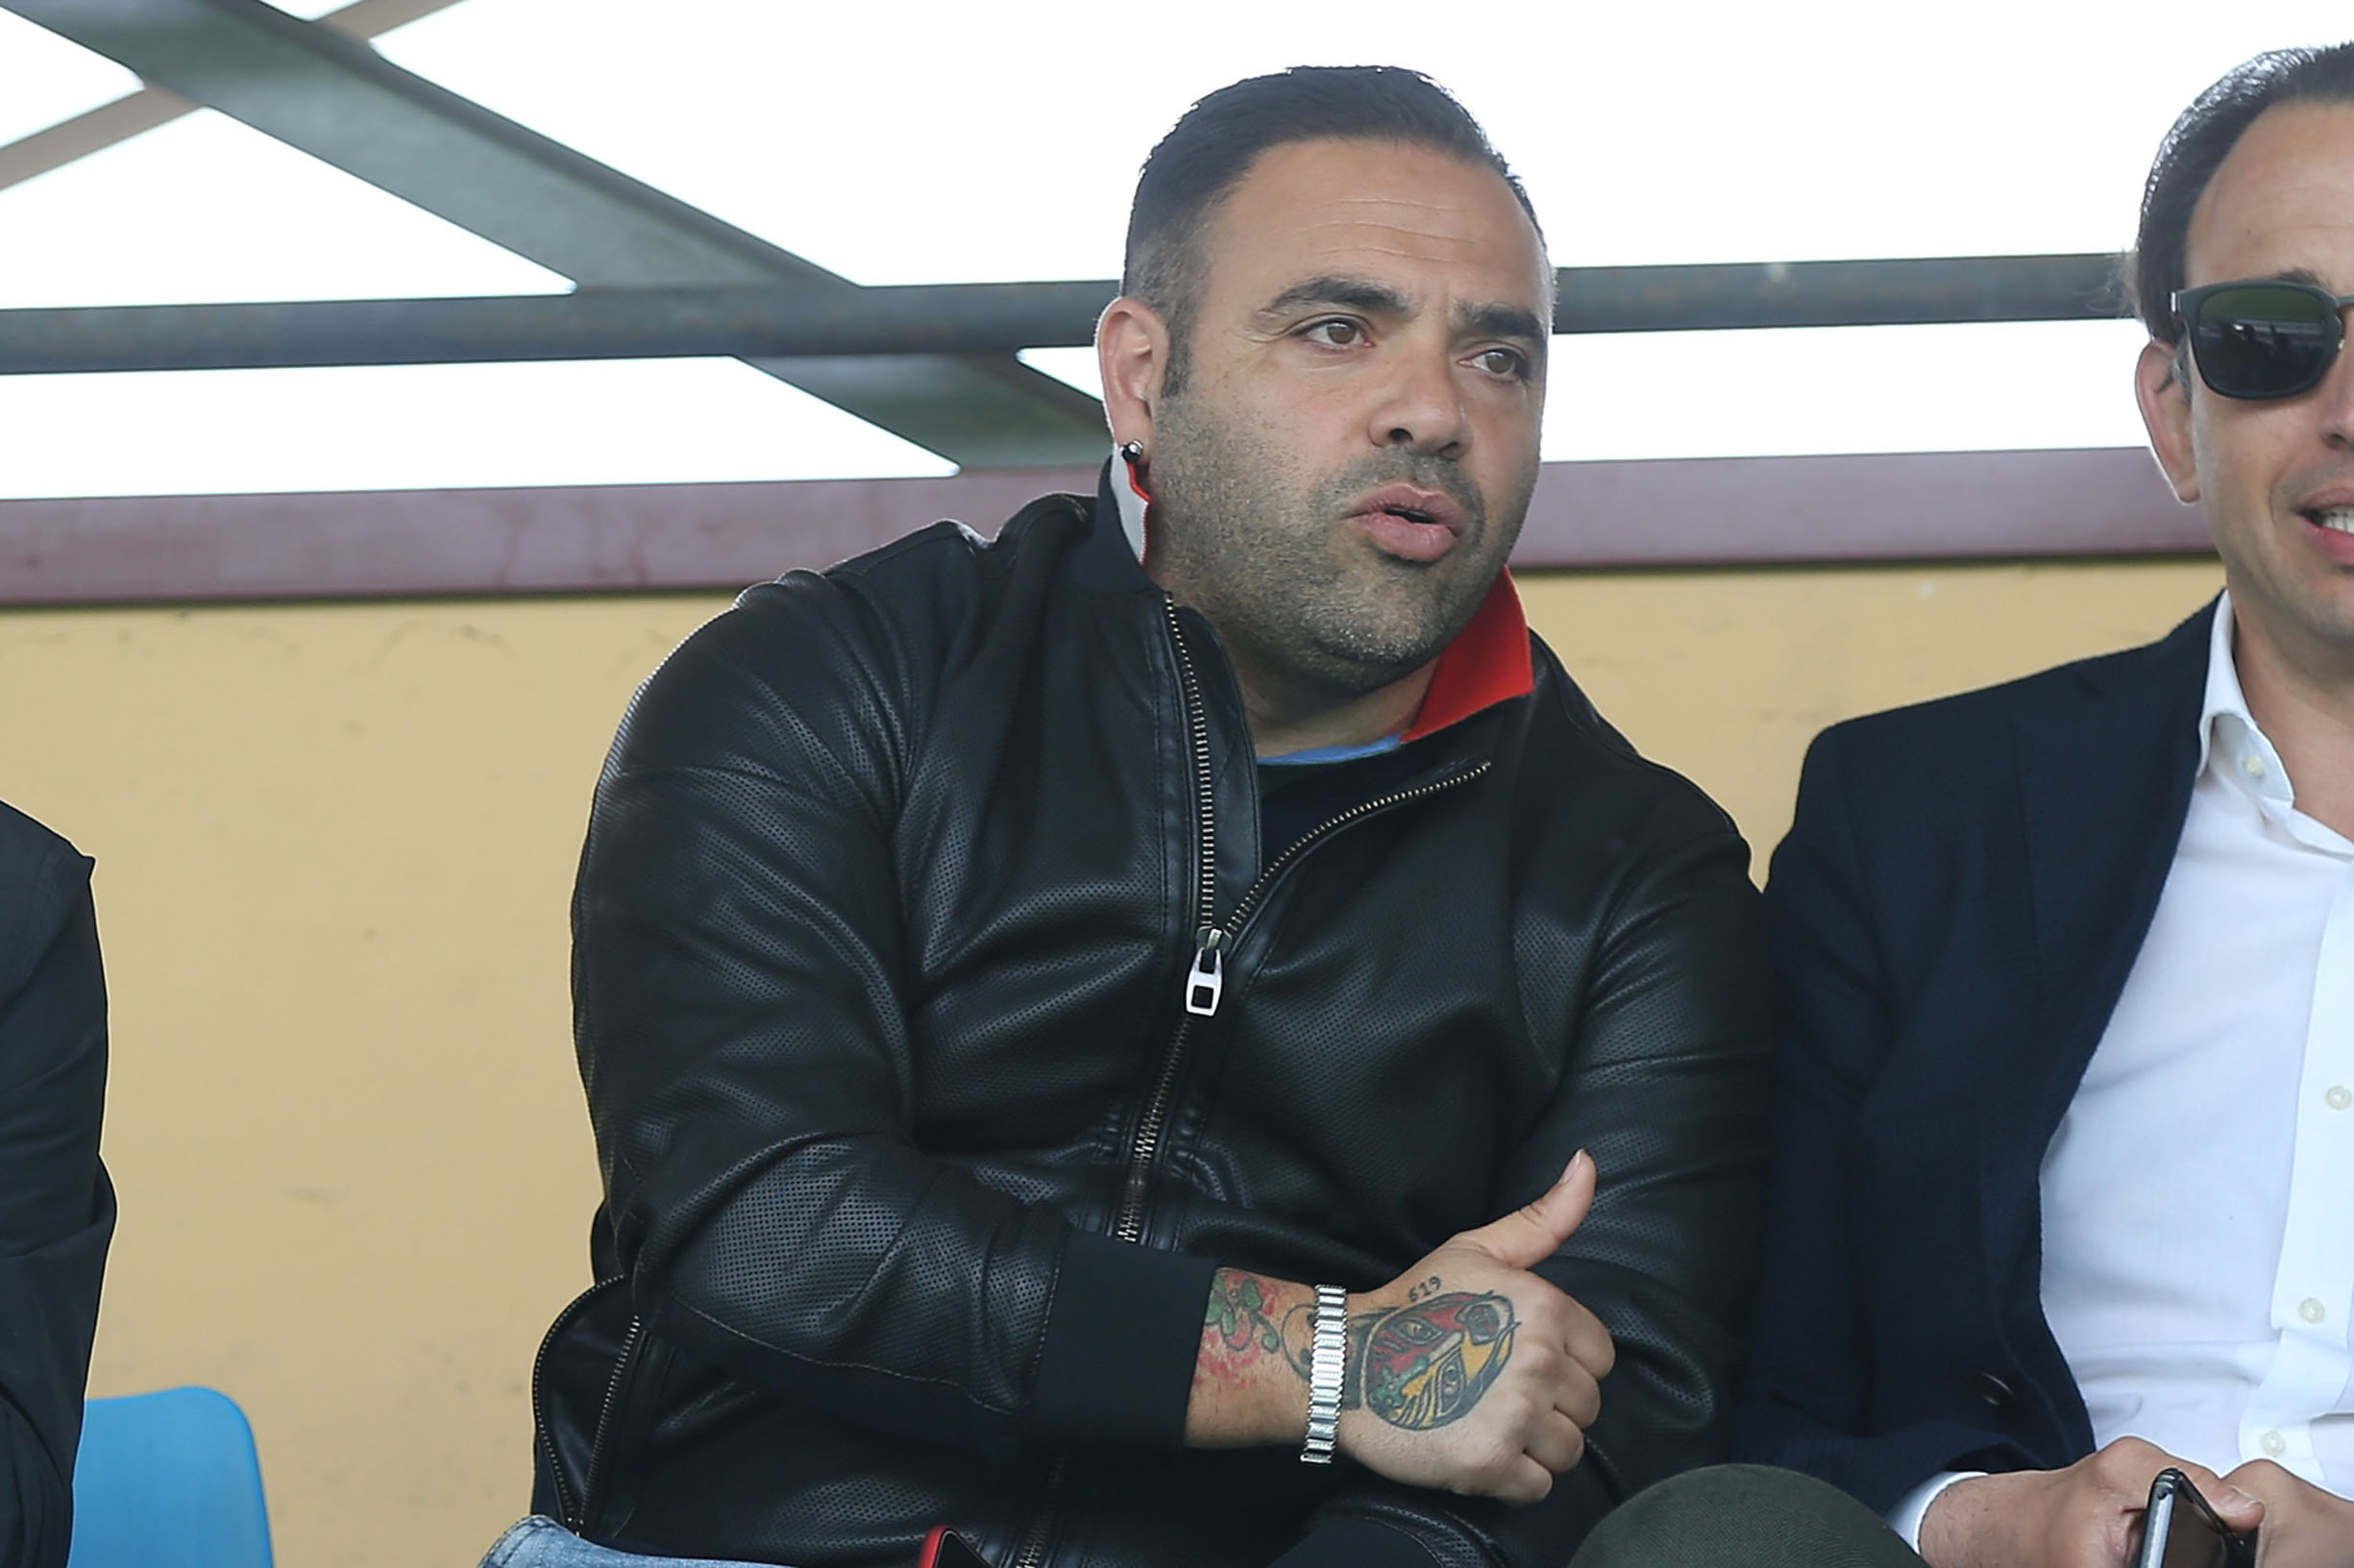 FLORENCE, ITALY - MAY 16: Fabrizio Miccoli during the SuperCoppa primavera 2 match between Novara U19 and US Citta di Palermo U19 at Centro Tecnico Federale di Coverciano on May 16, 2018 in Florence, Italy.  (Photo by Gabriele Maltinti/Getty Images)